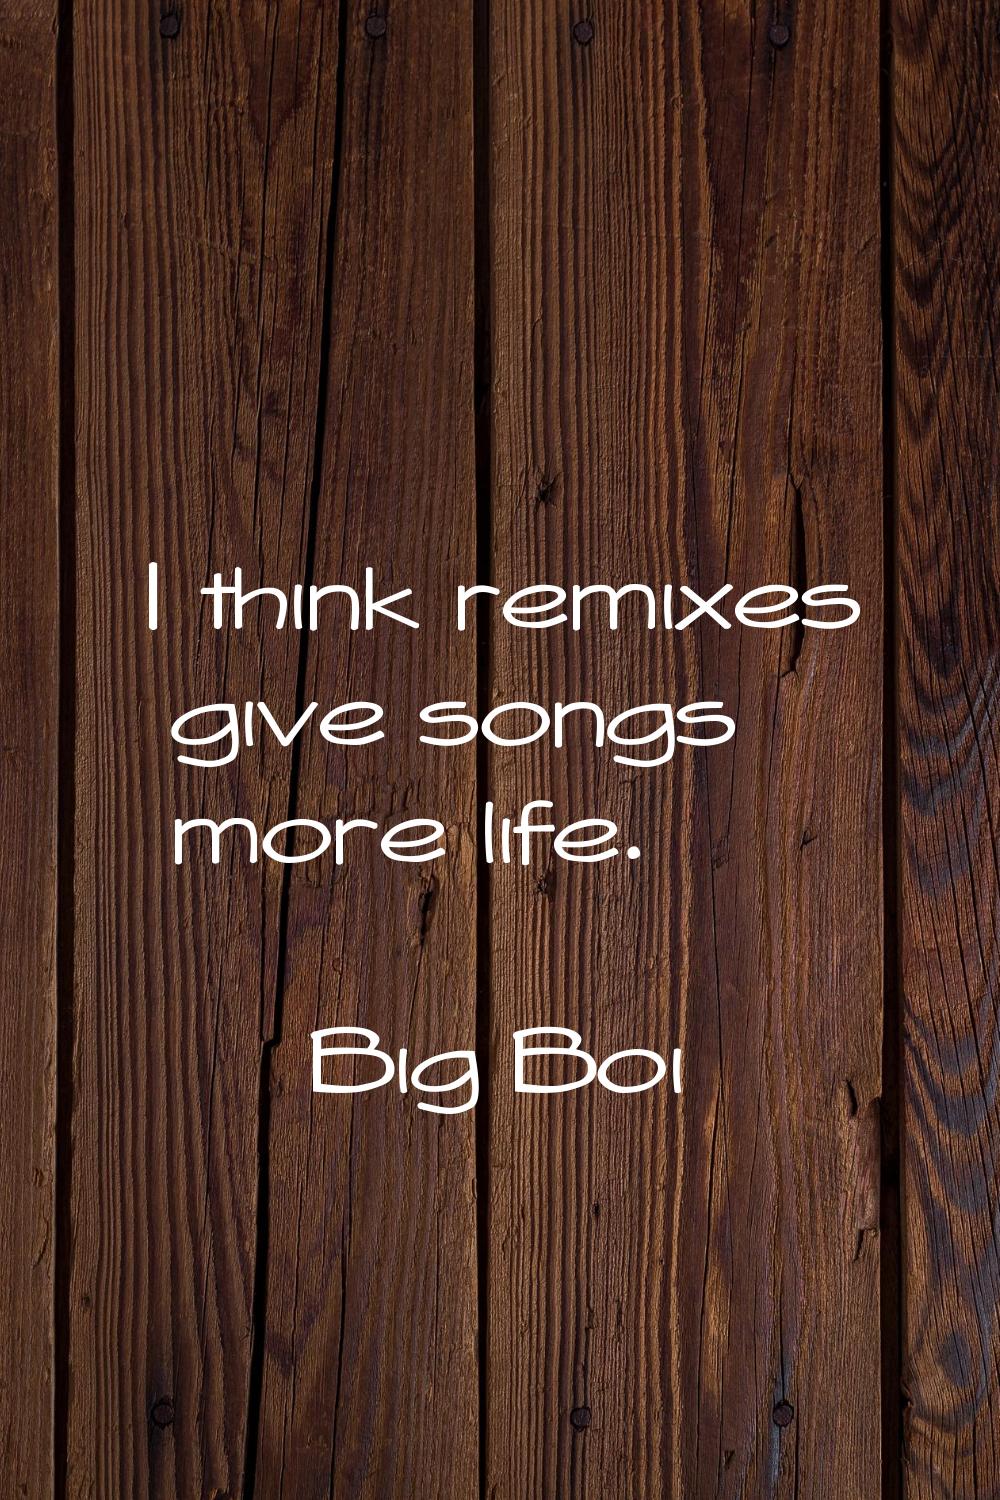 I think remixes give songs more life.